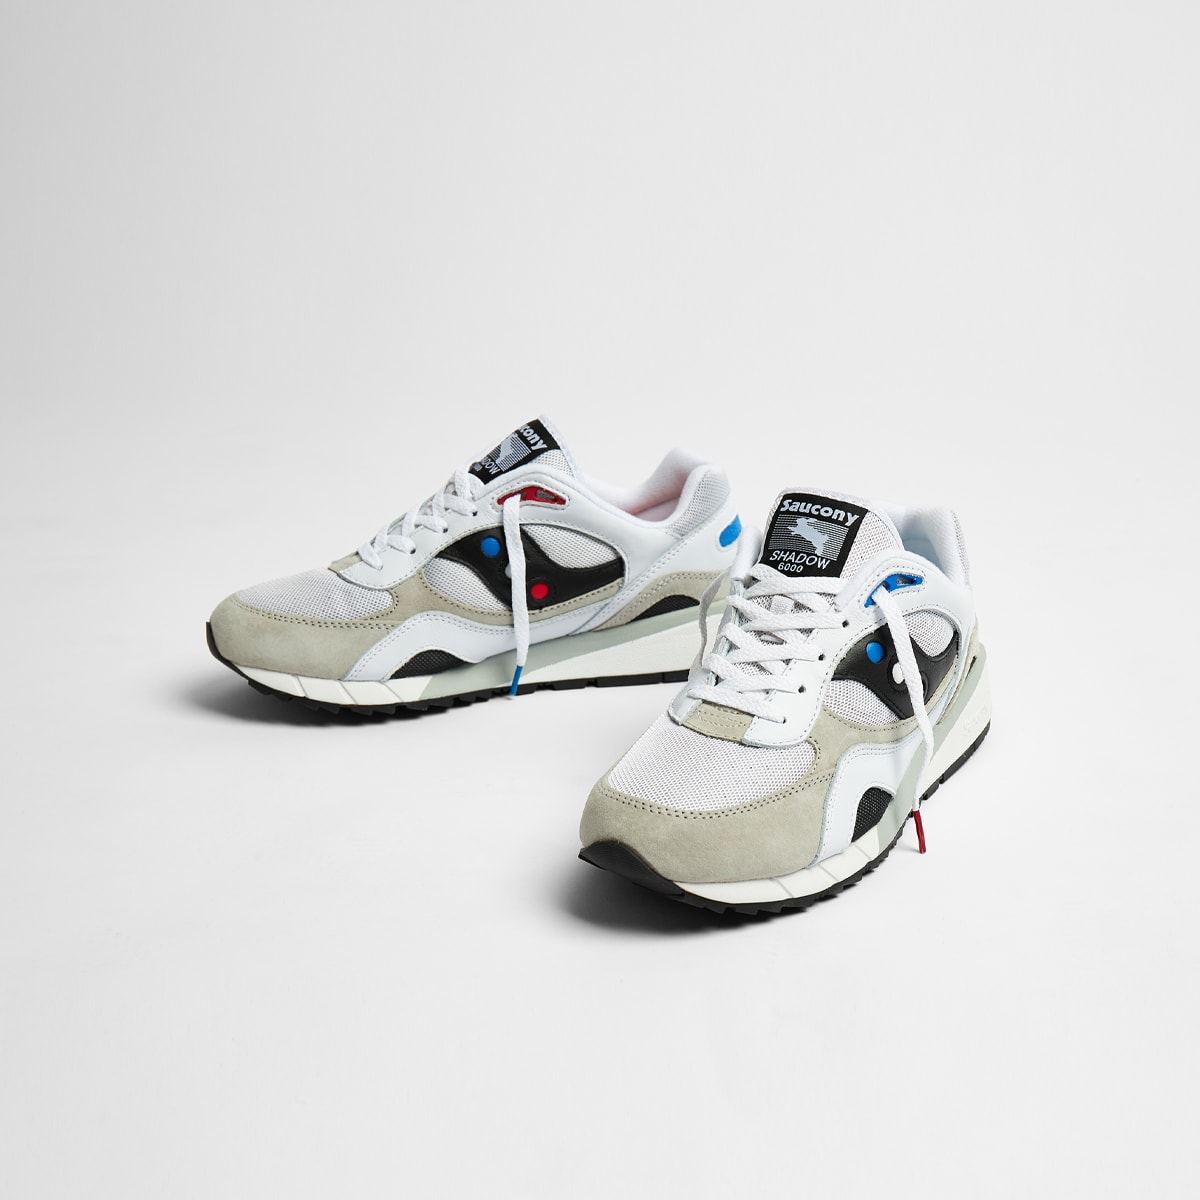 Saucony x Extra Butter Shadow 6000 'Rabbit Hole' (White) | END. Launches